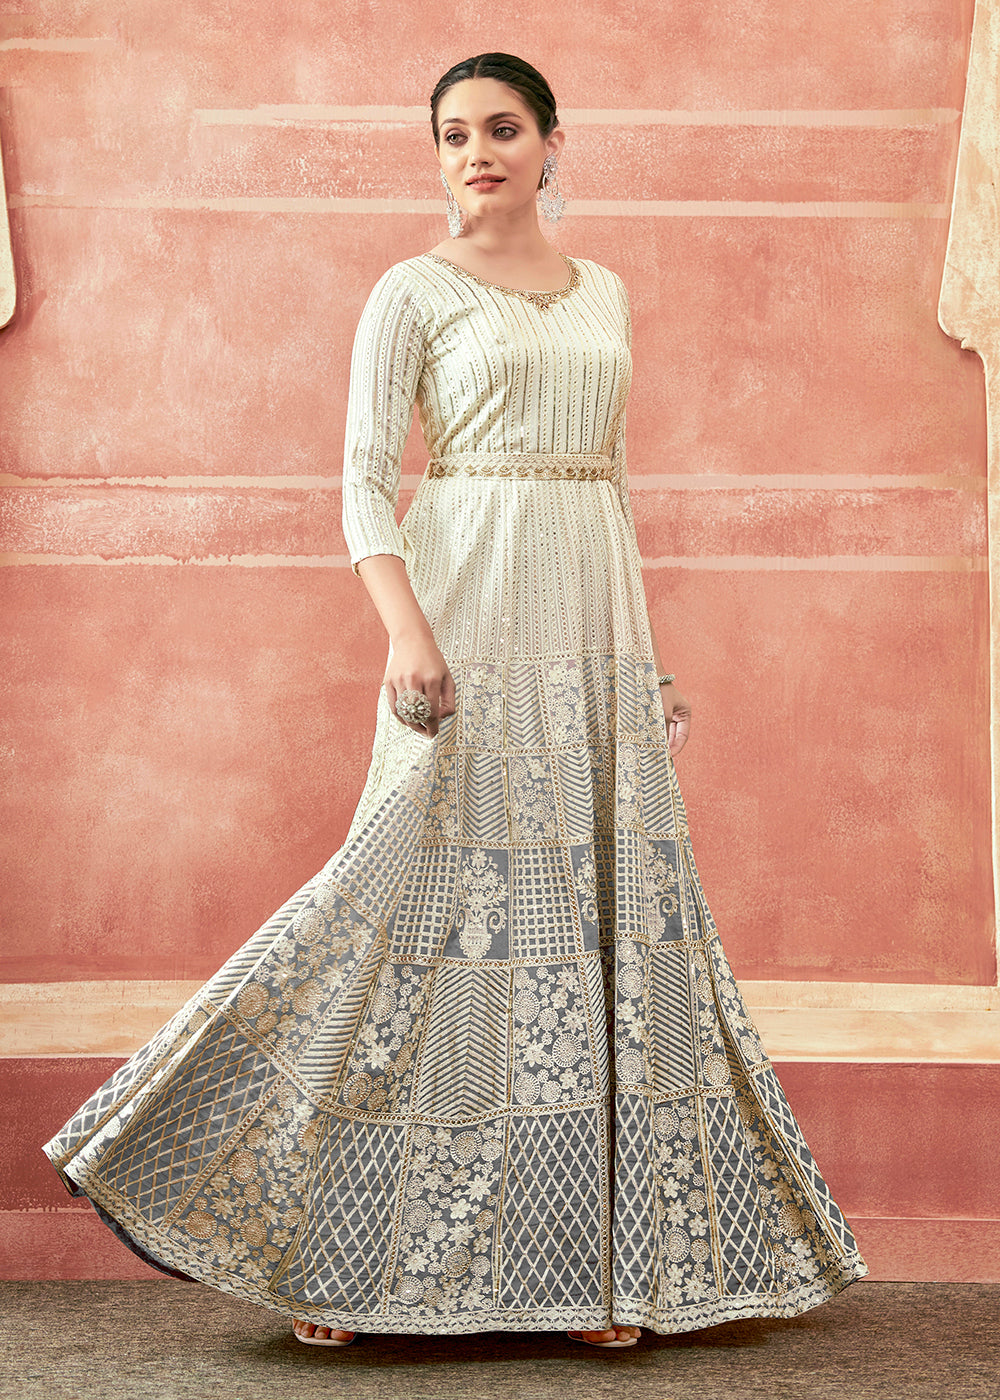 Buy Now Off White & Grey Georgette Embroidered Festive Anarkali Suit Online in USA, UK, Australia, New Zealand, Canada & Worldwide at Empress Clothing. 